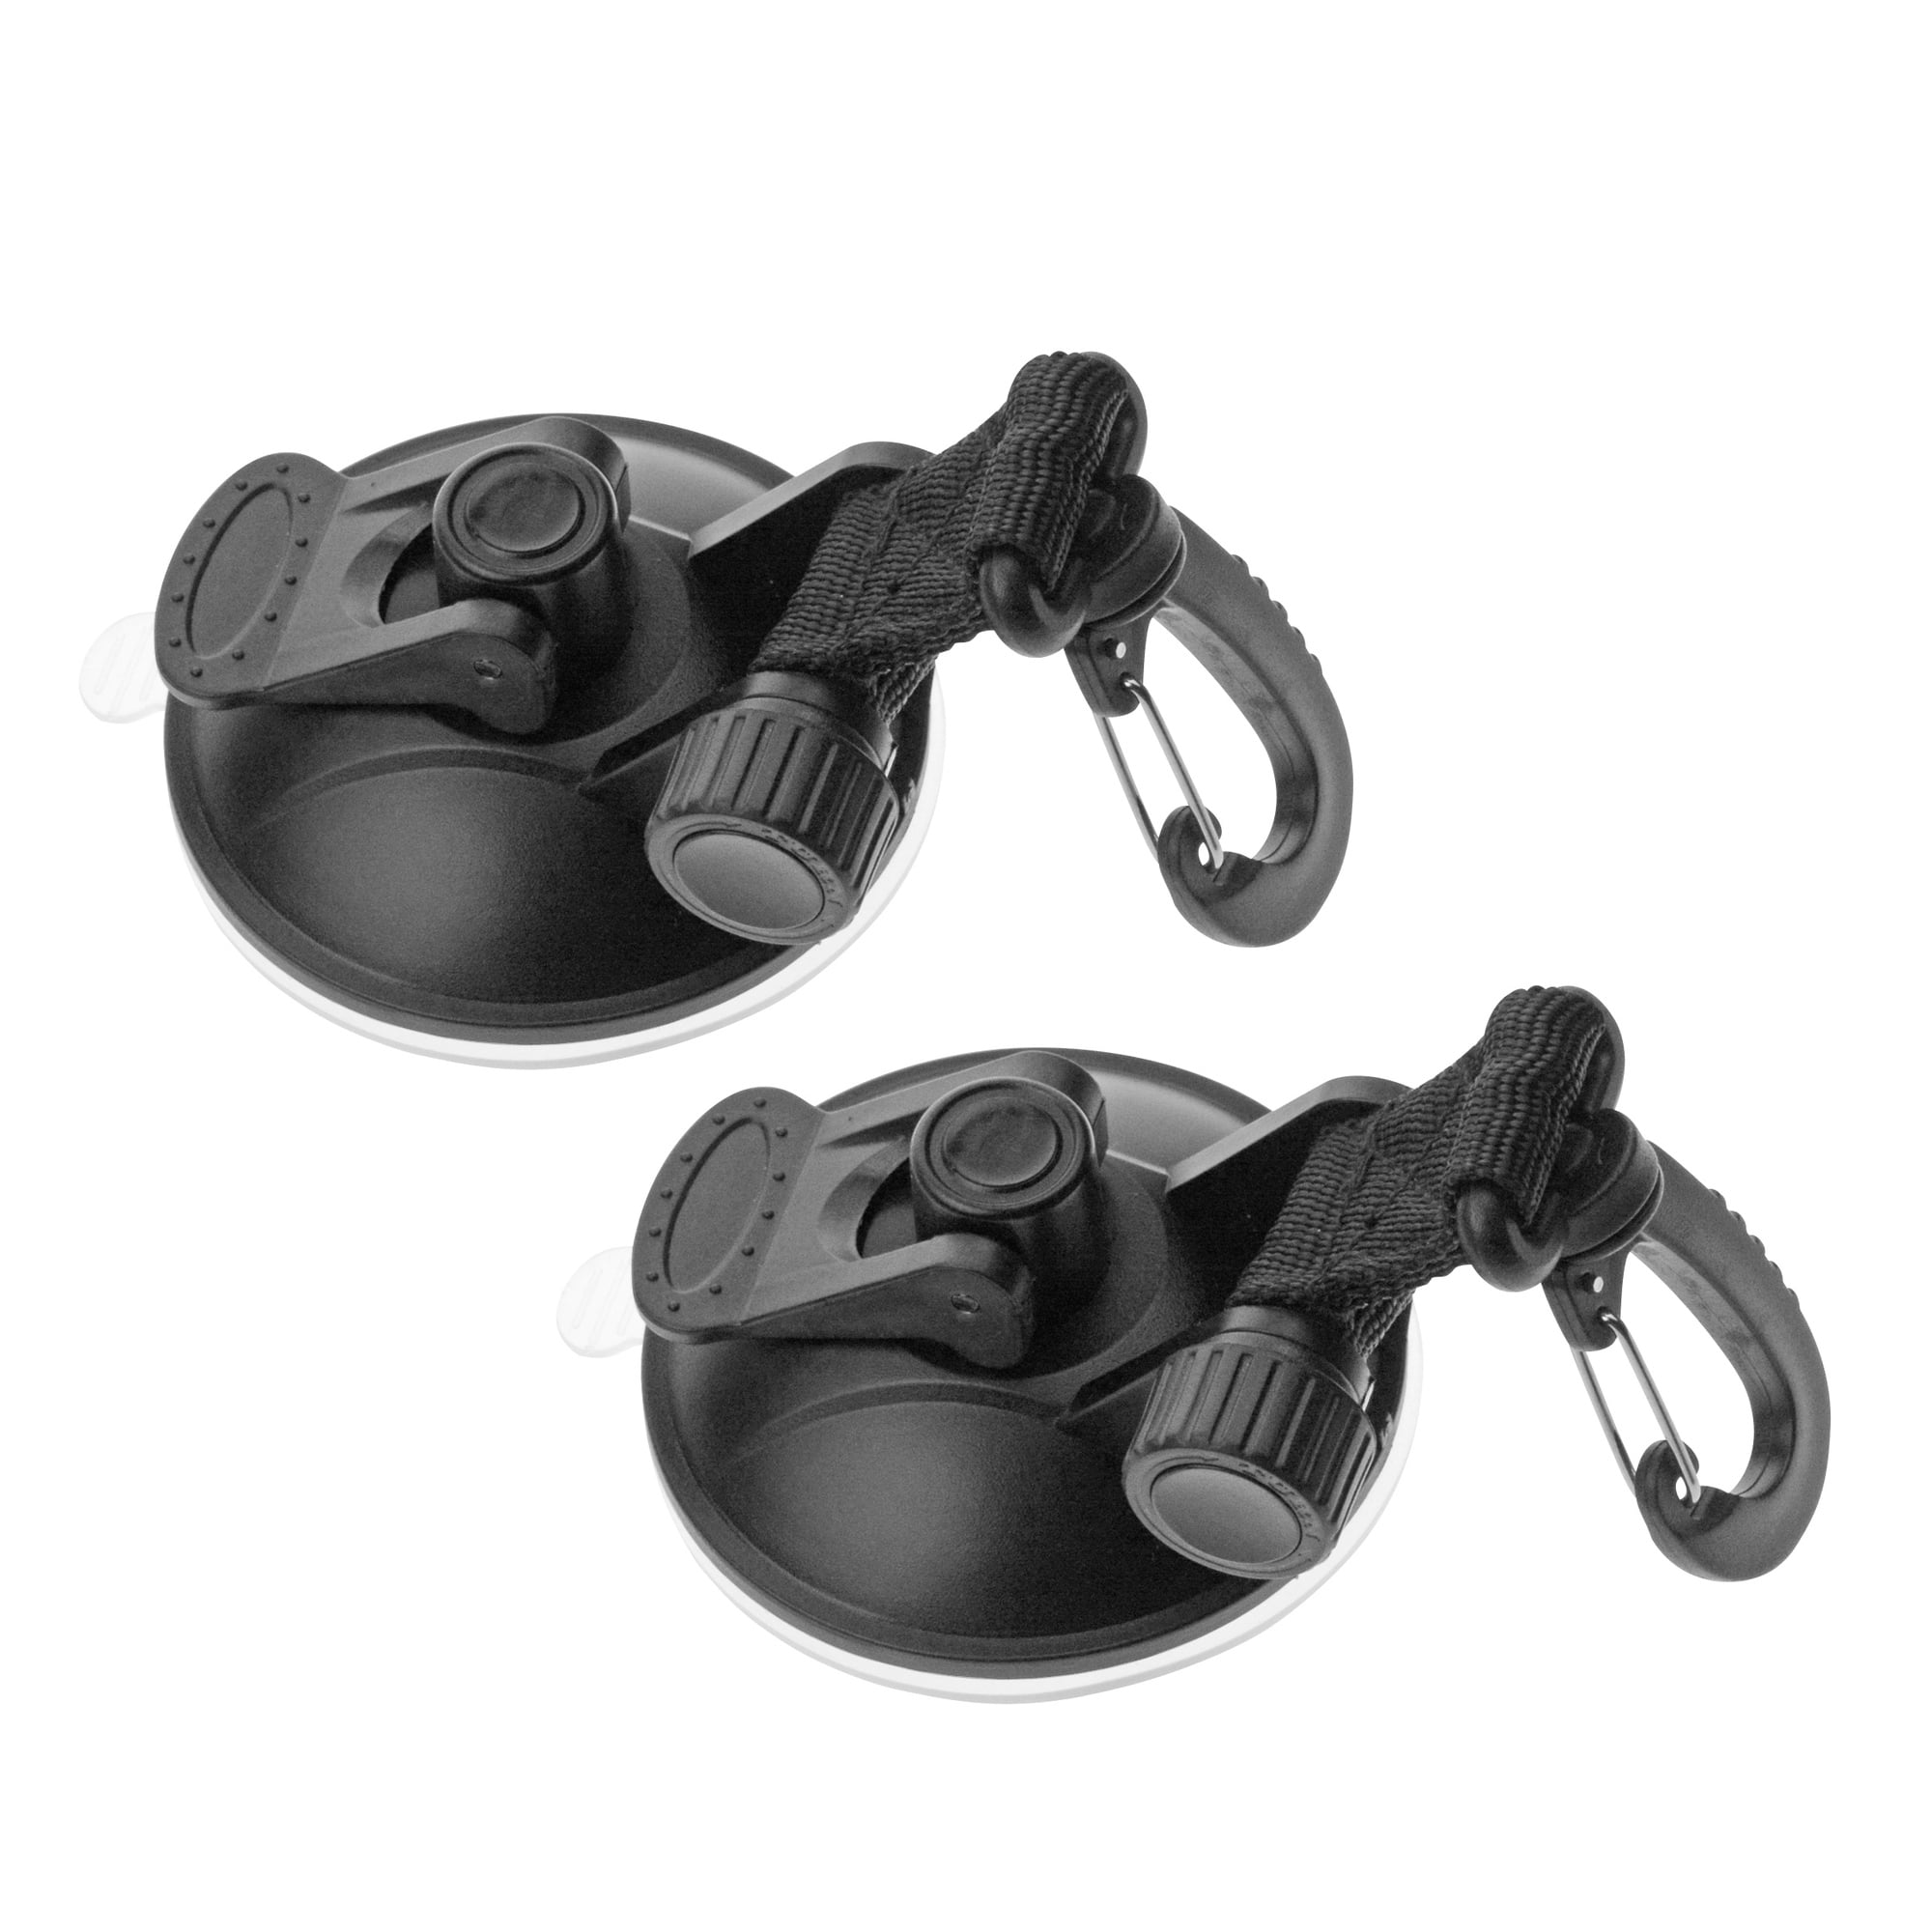 2 Pack， Suction Cup Tie Downs Suction Cup Mount Car Hook Rack for smooth surface 